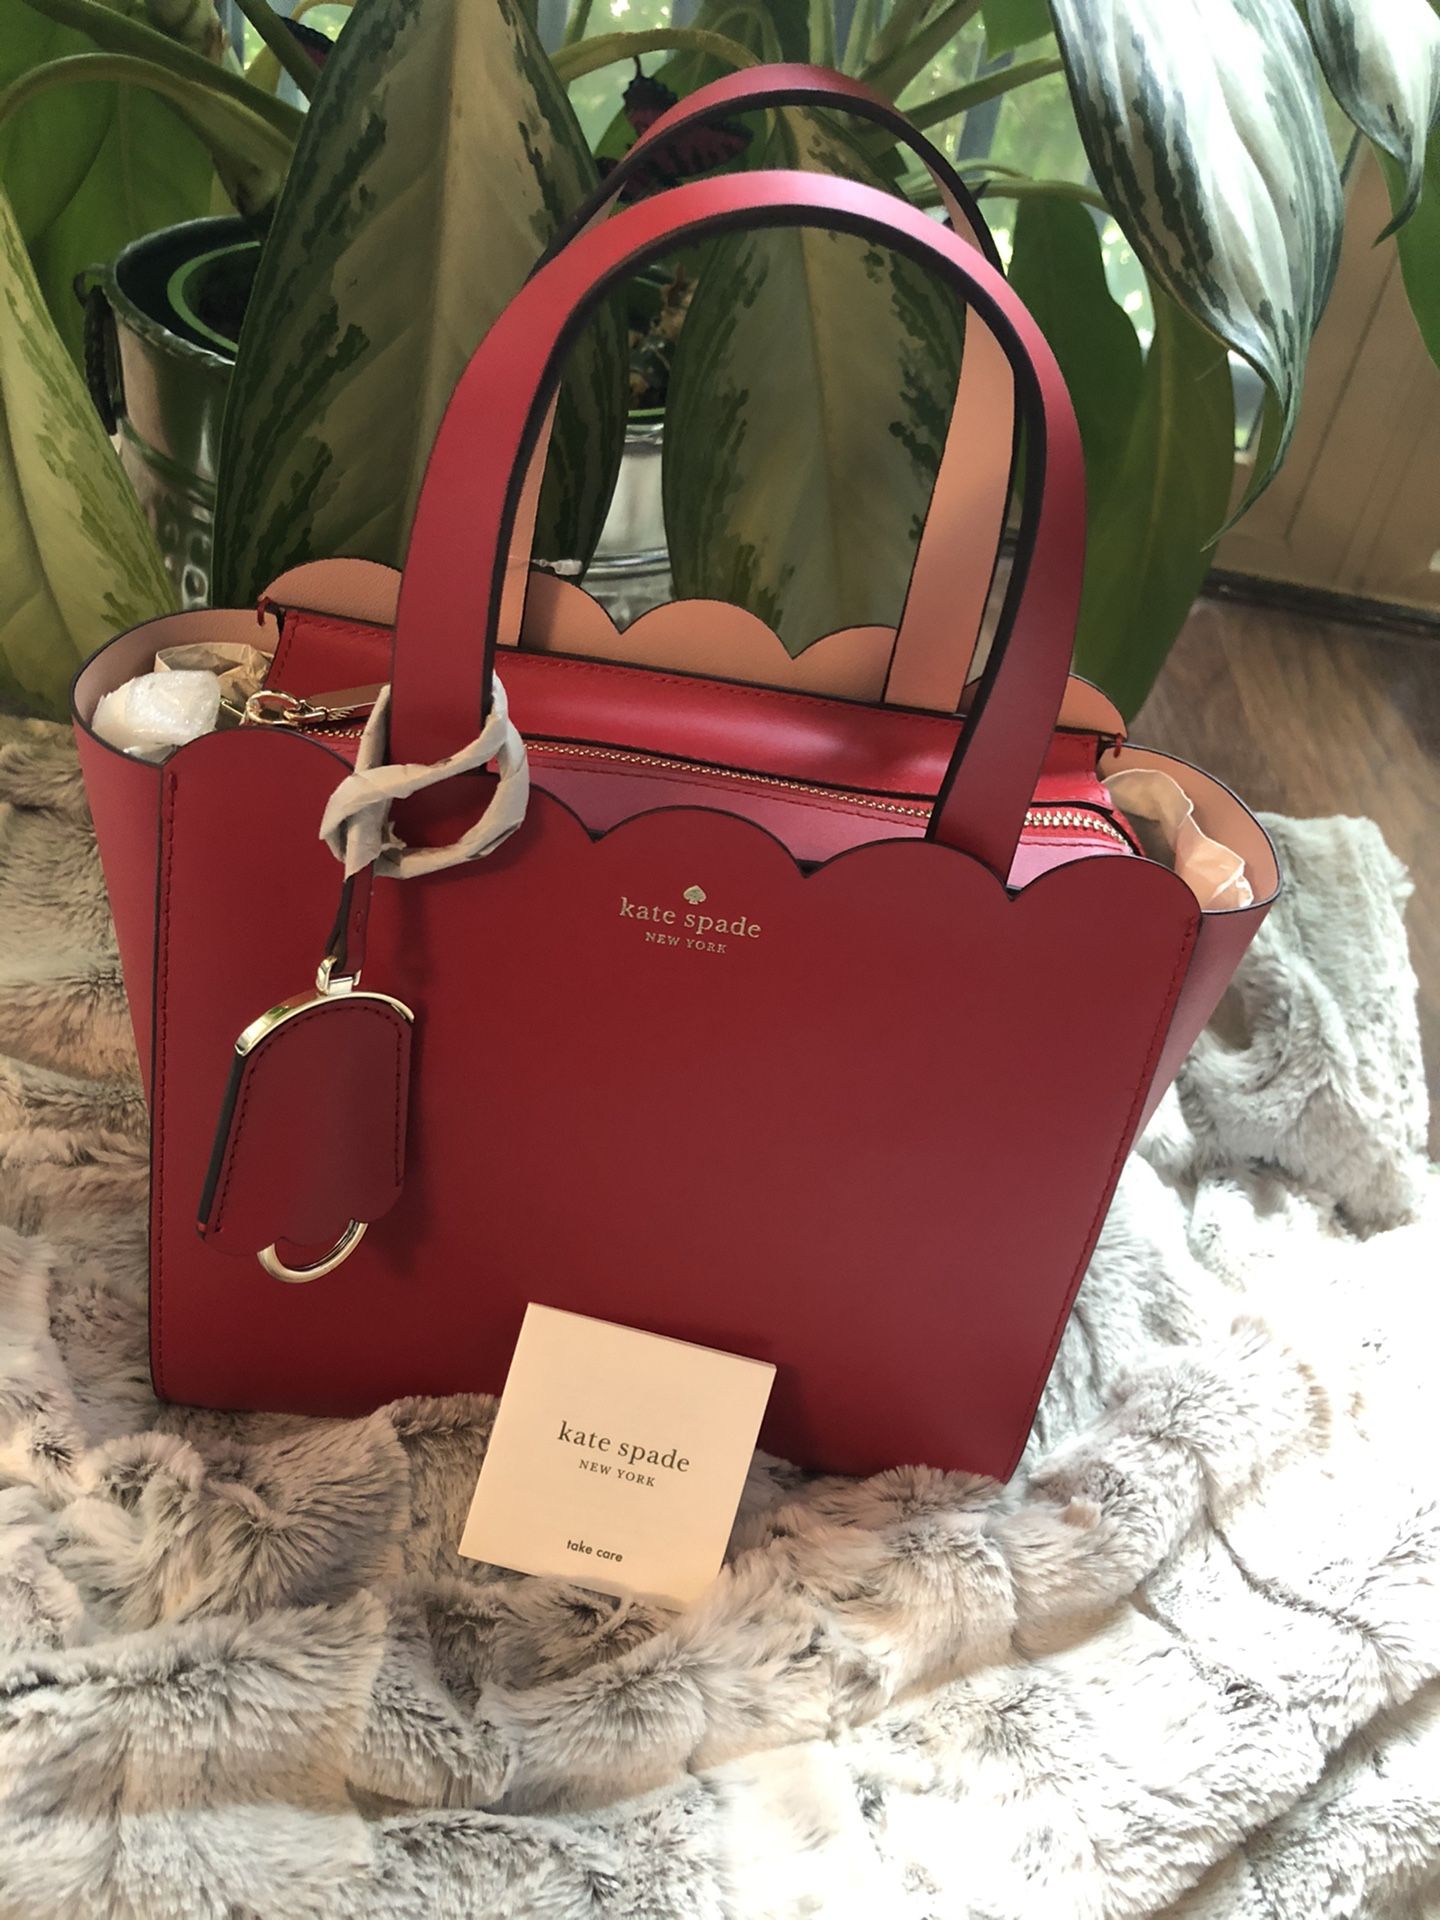 Kate Spade red purse. ♠️ BRAND NEW 🏷